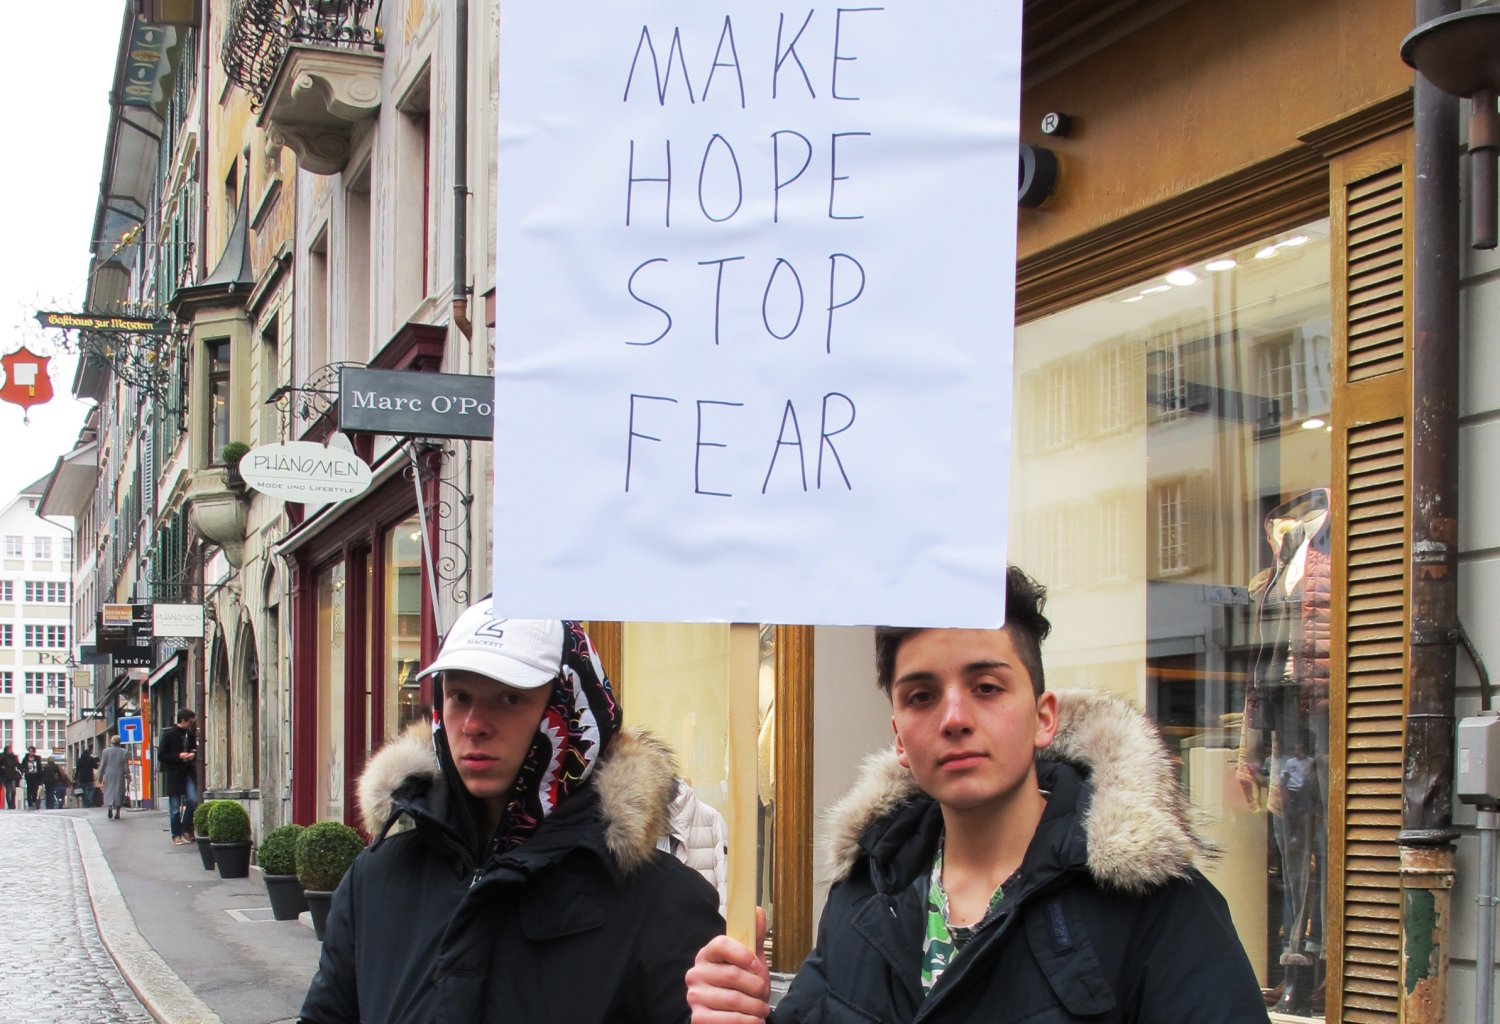 Two boys hold up a sign saying "Make Hope Stop Fear"